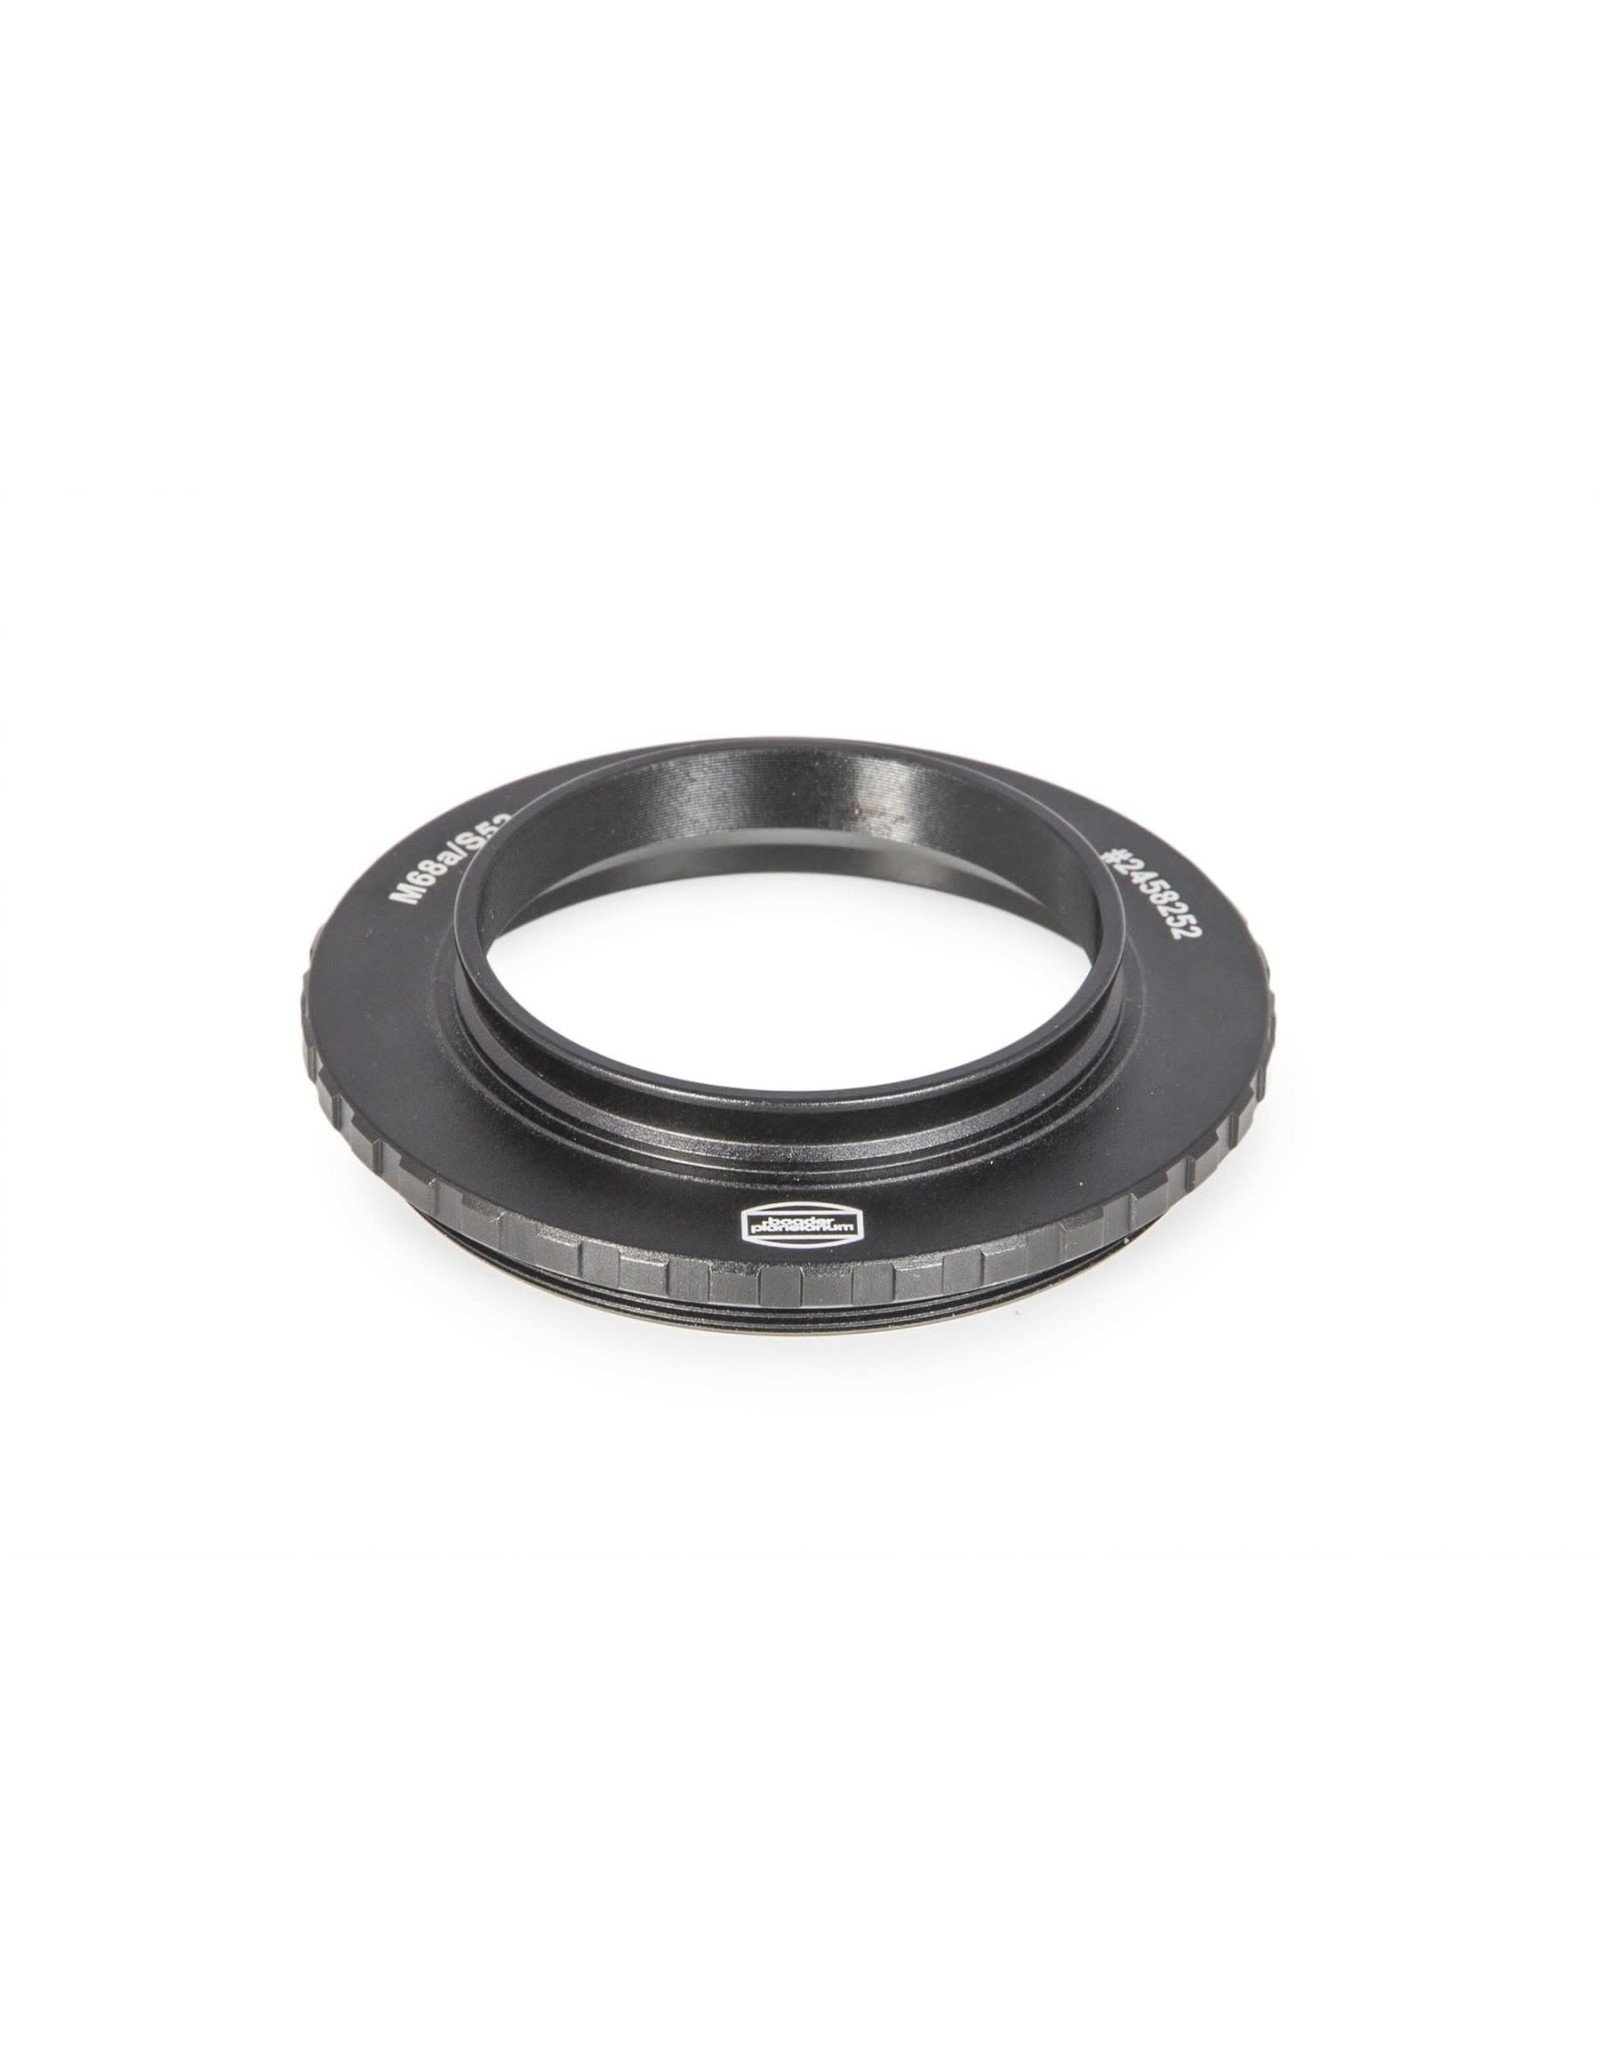 Baader Planetarium Adapter M68/S52 for Baader Wide-T-Rings